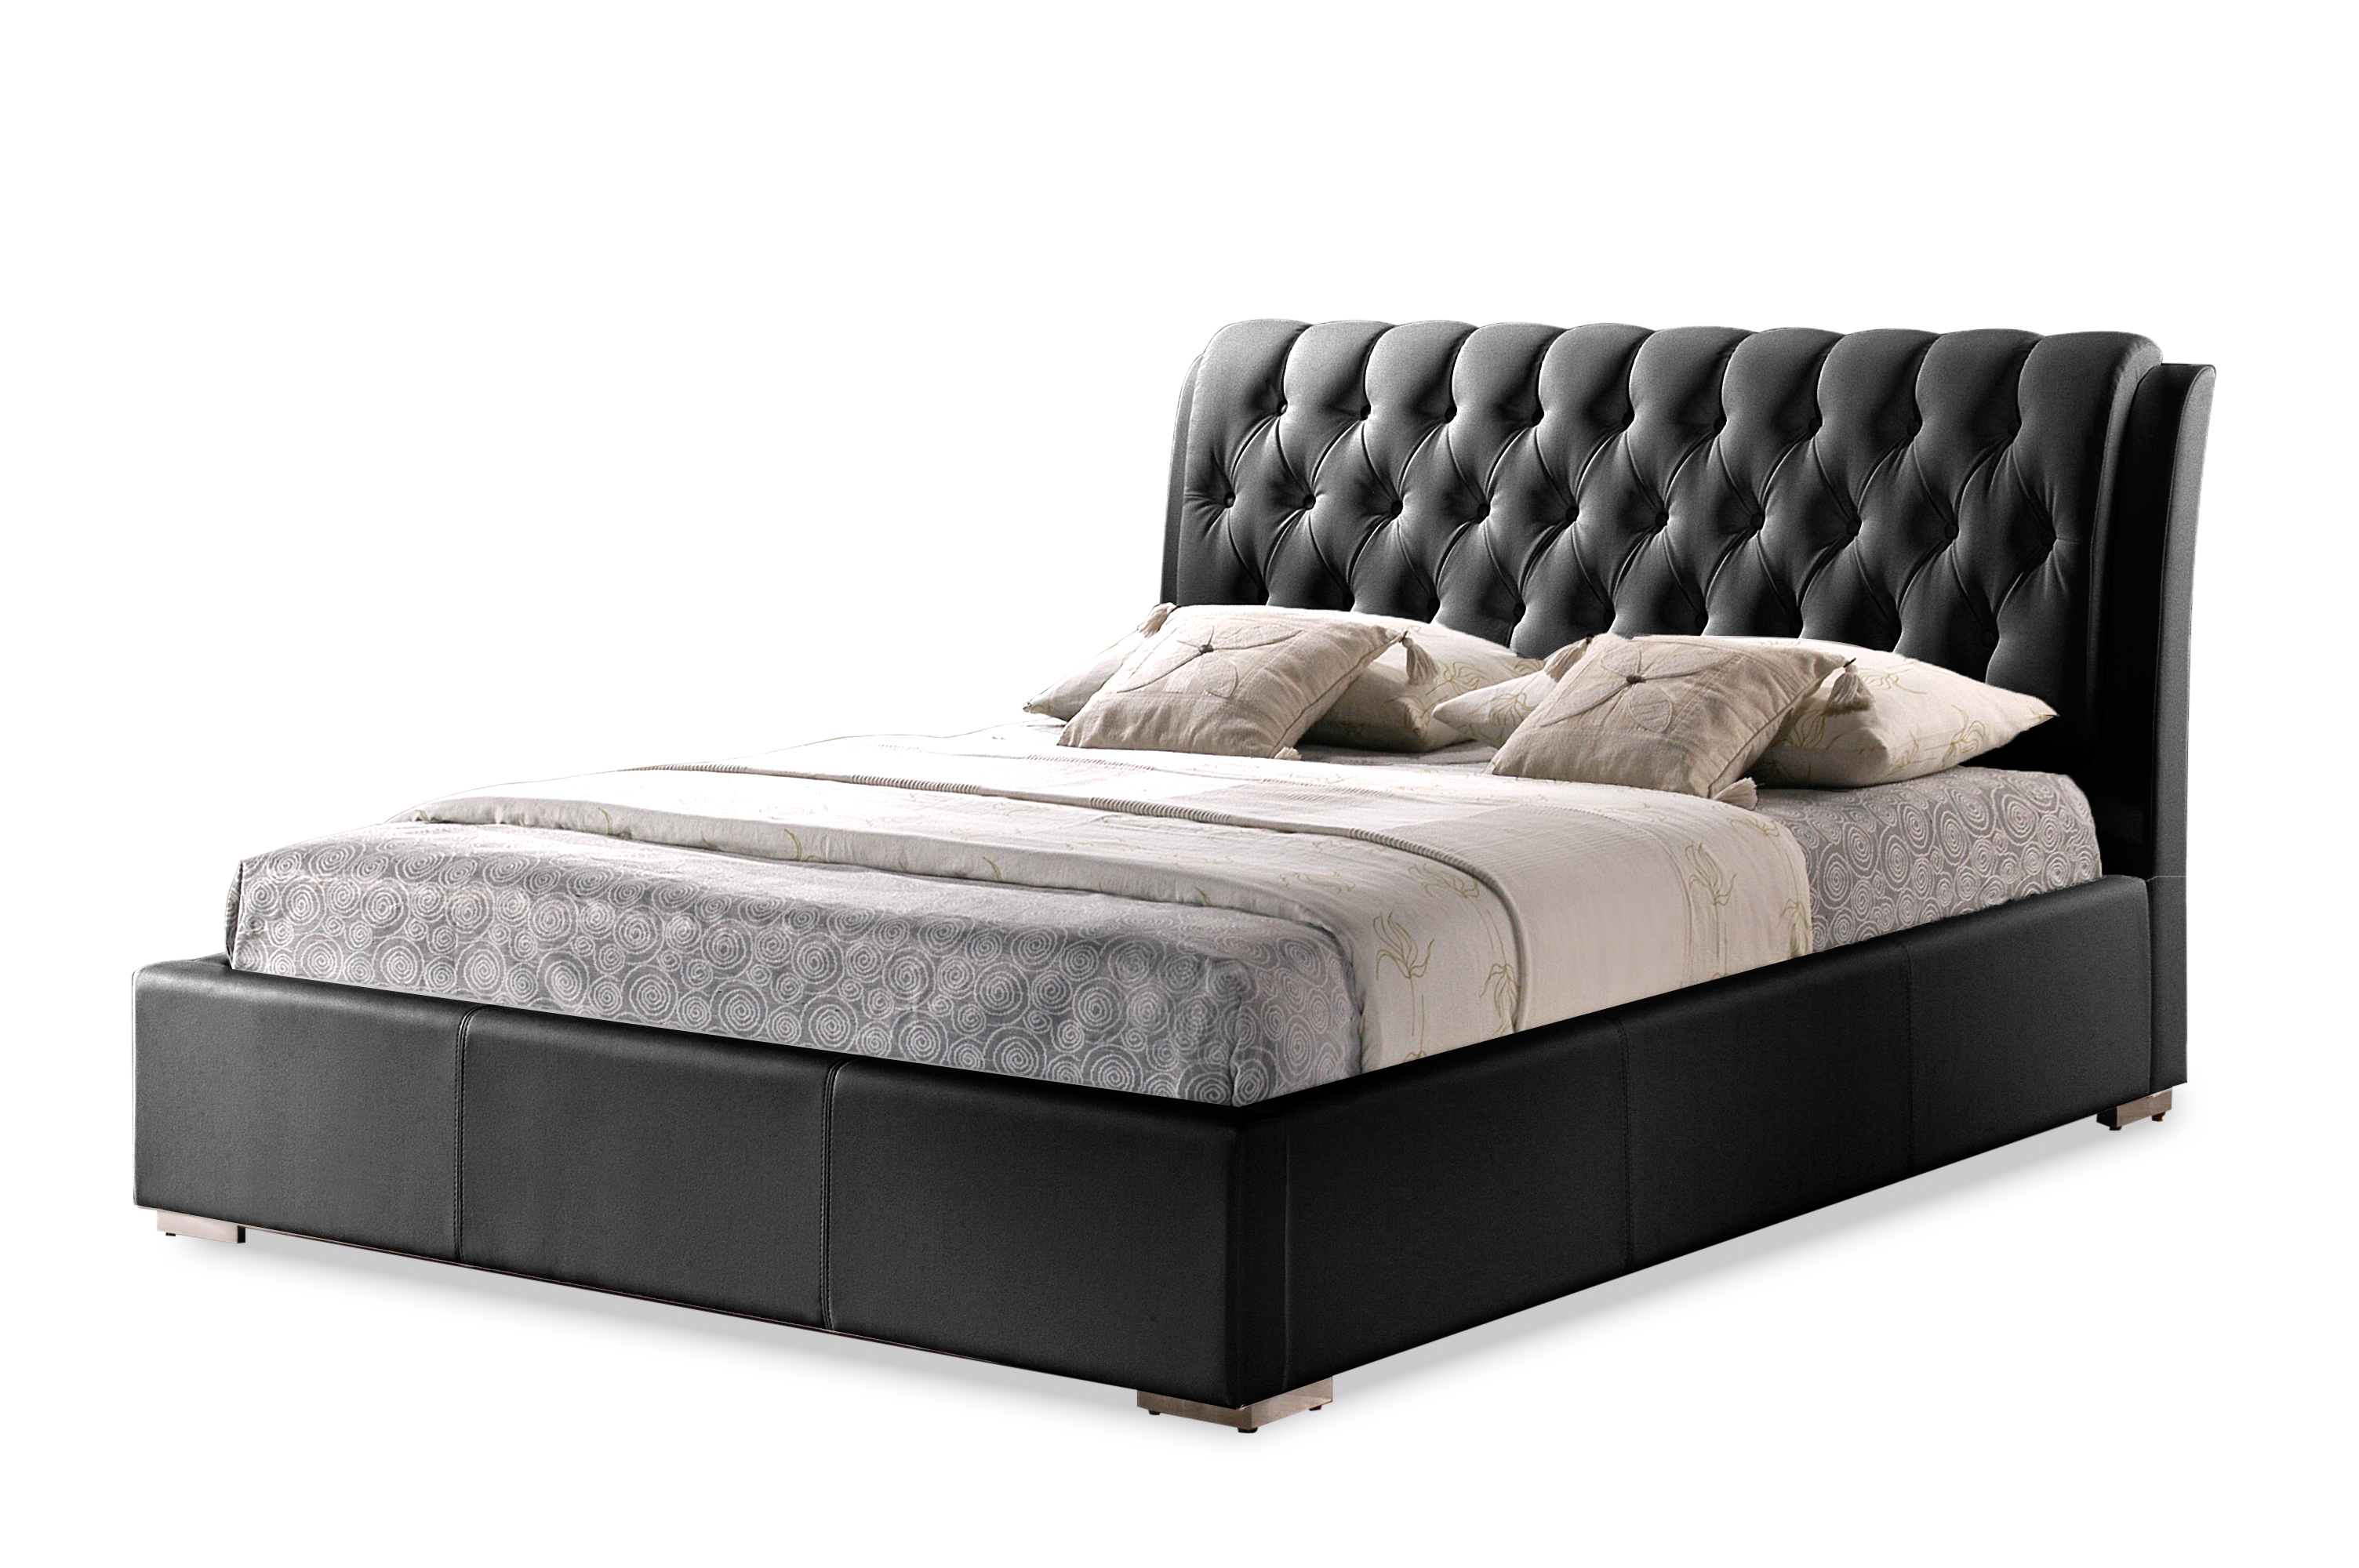 Bianca Black Modern Bed With Tufted, Black Bed Frame With Headboard